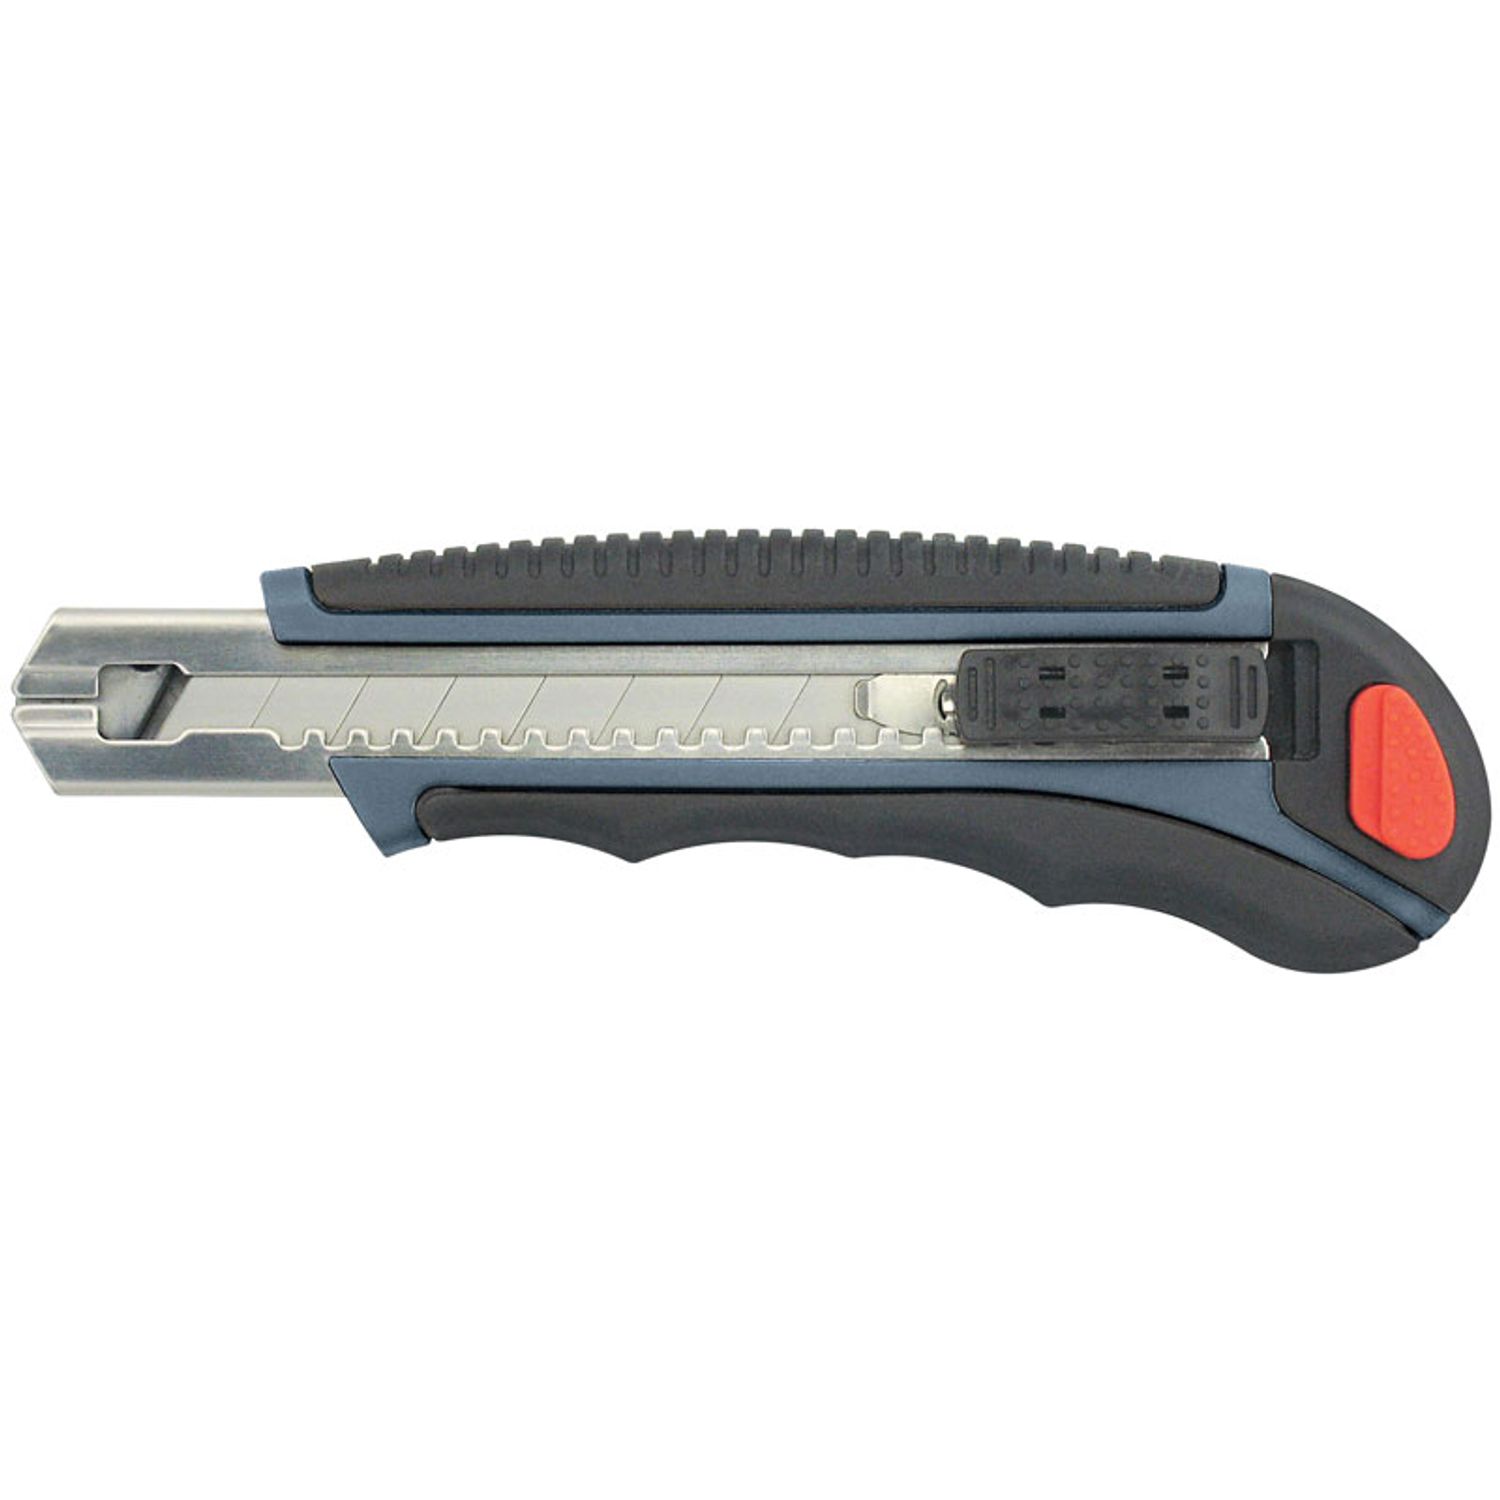 Clauss 8-Count Large Snap Blade Utility Knife Heavy-Duty, Includes 6 Blades  - KnifeCenter - 18028